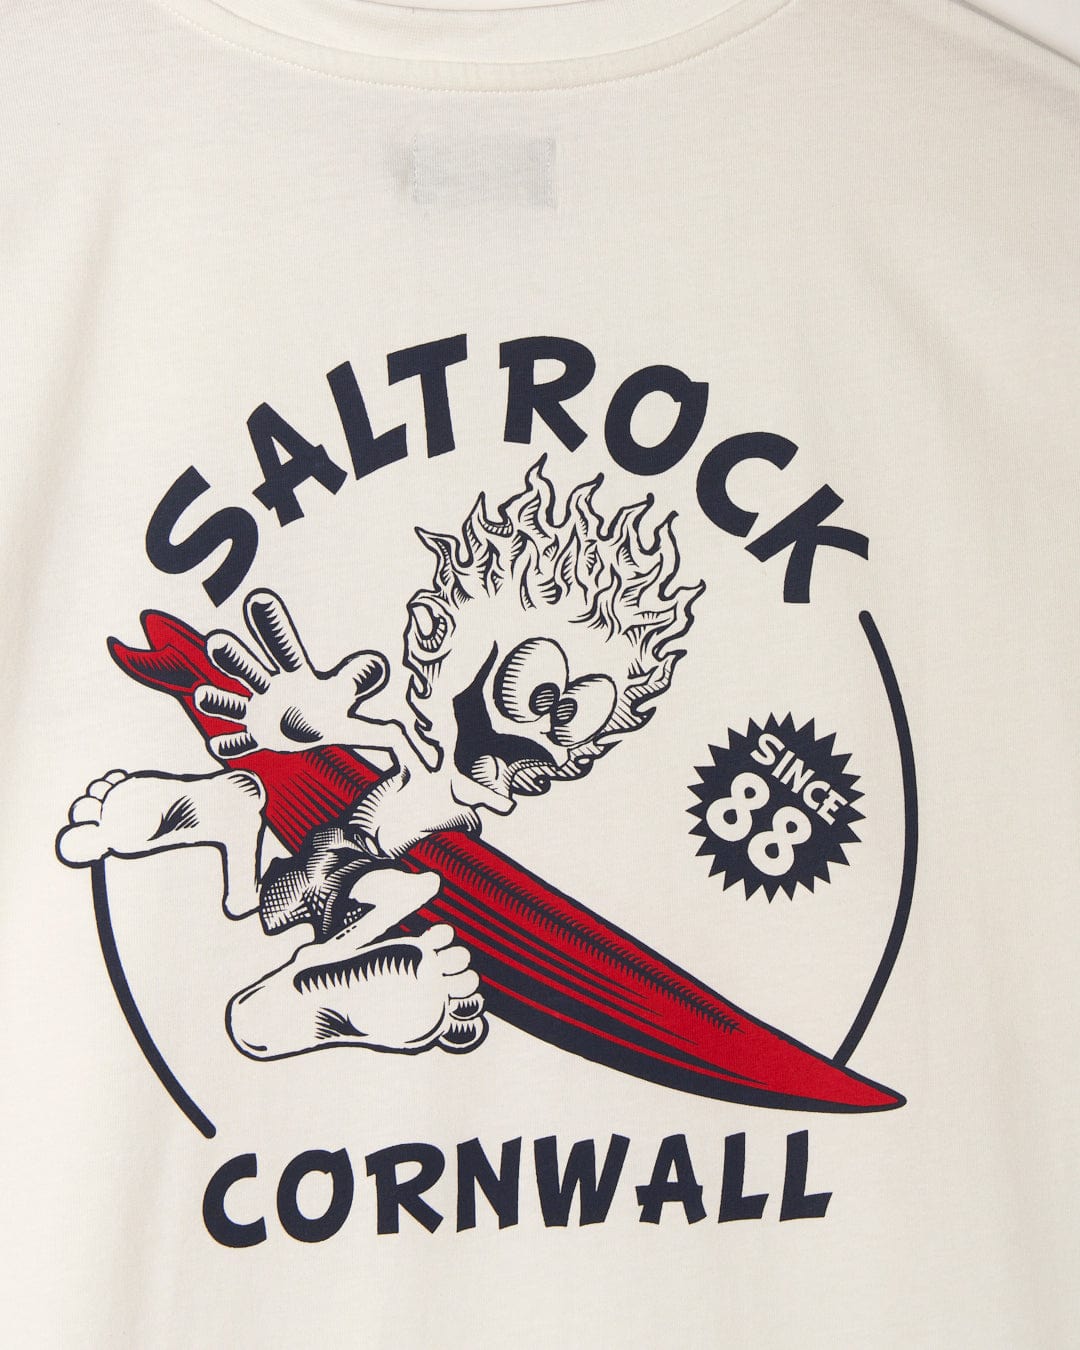 White Wave Rider Cornwall t-shirt made from peached soft material, featuring a graphic Saltrock branding logo with the text "Saltrock Cornwall" and an illustration of a stylized surfer on a wave.